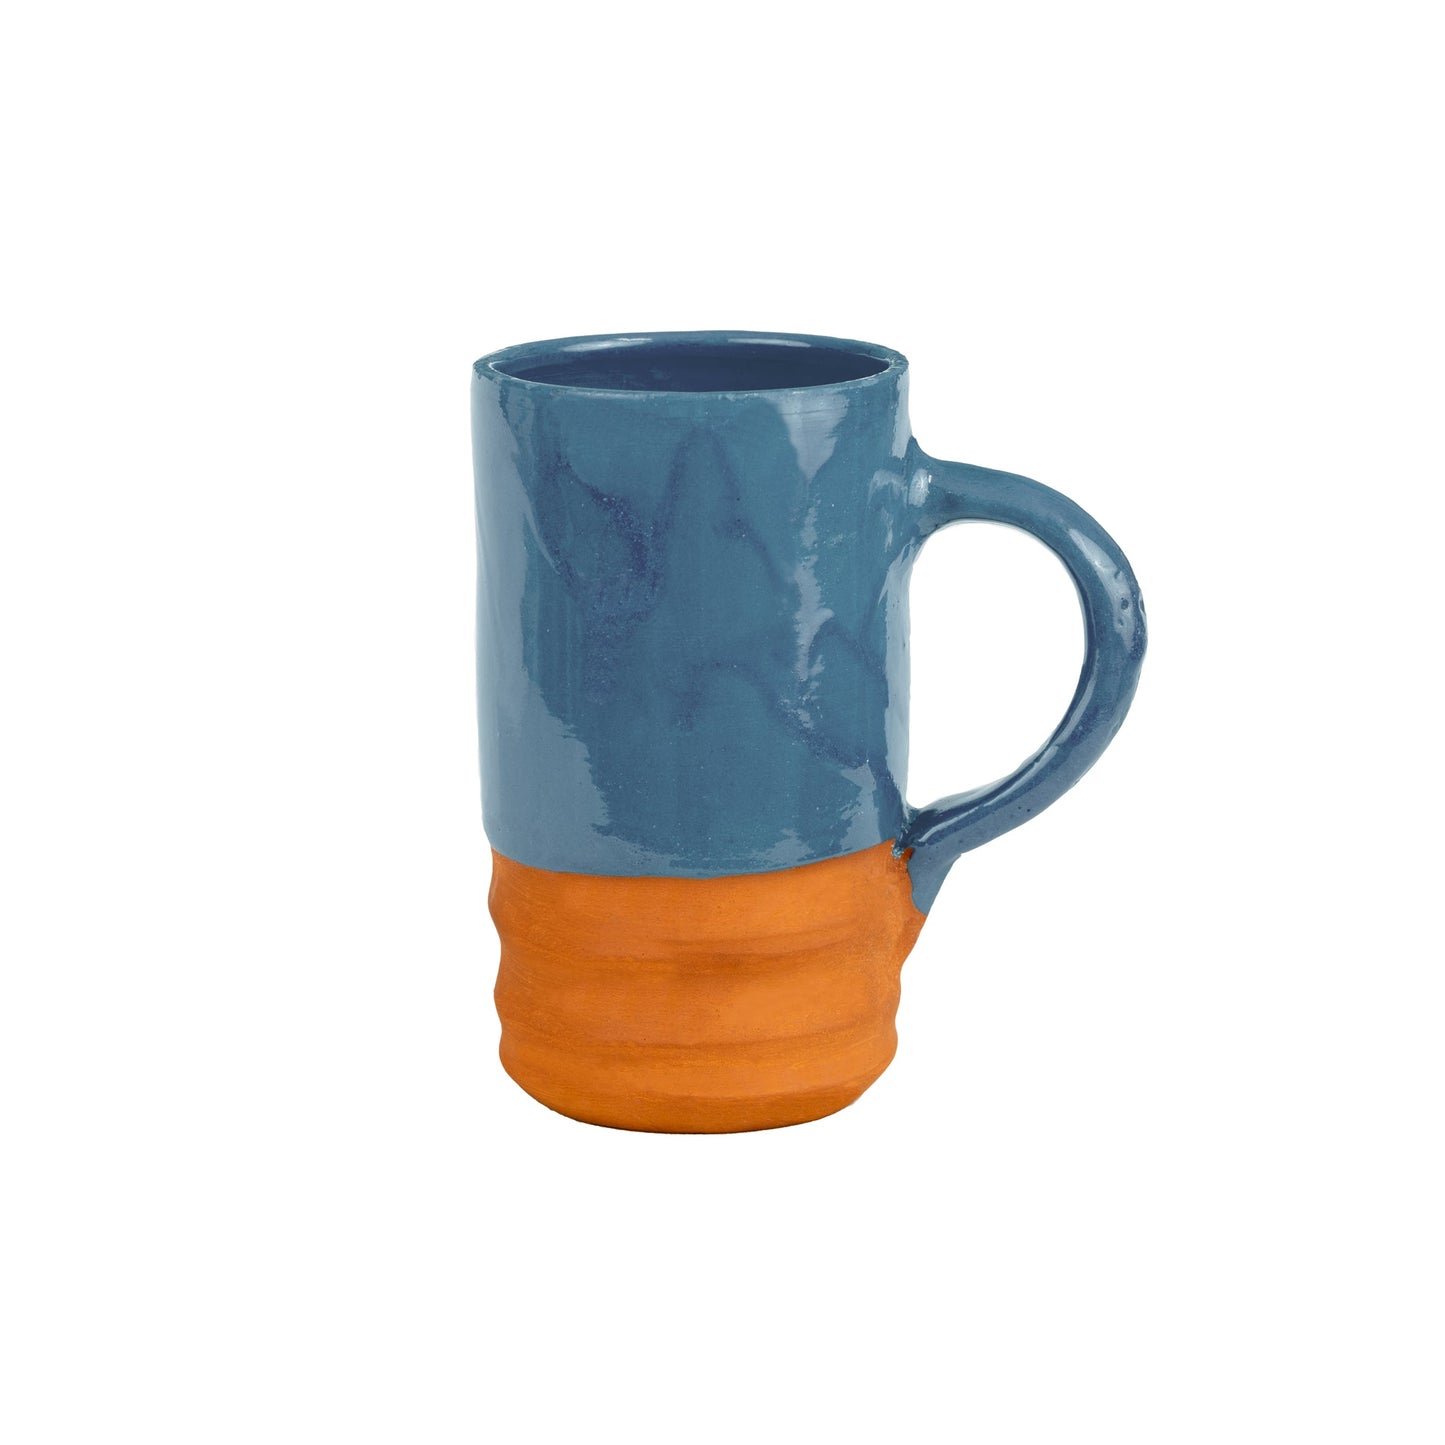 Clay mug for beer | clay glass for beer 